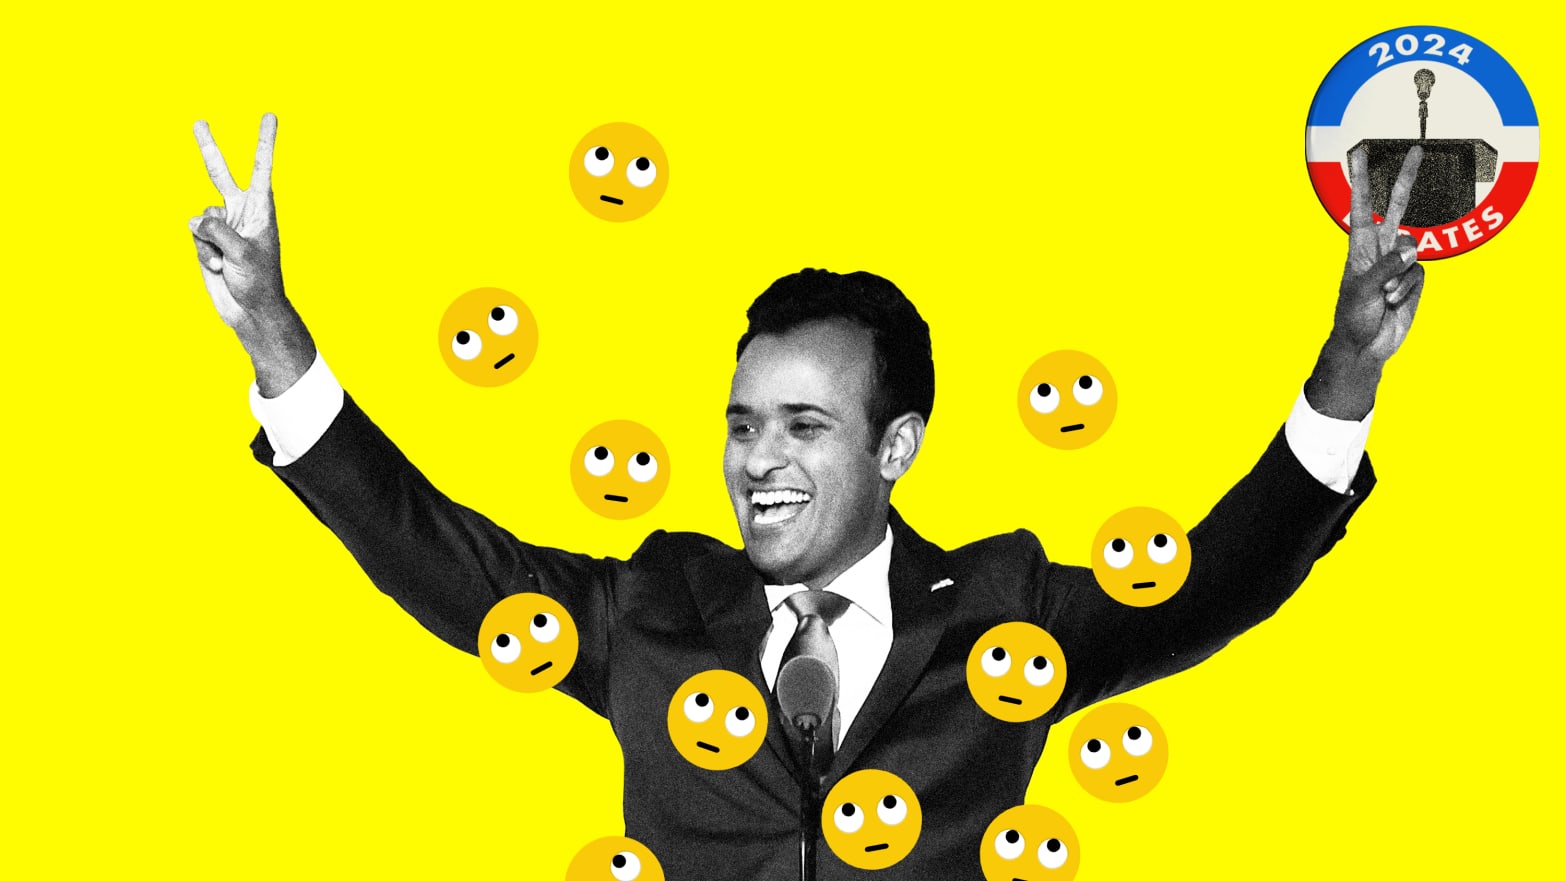 Photo illustration of Vivek Ramaswamy from the GOP debate holding his arms out with peace signs, with eye-rolling smiley faces scattered around him.